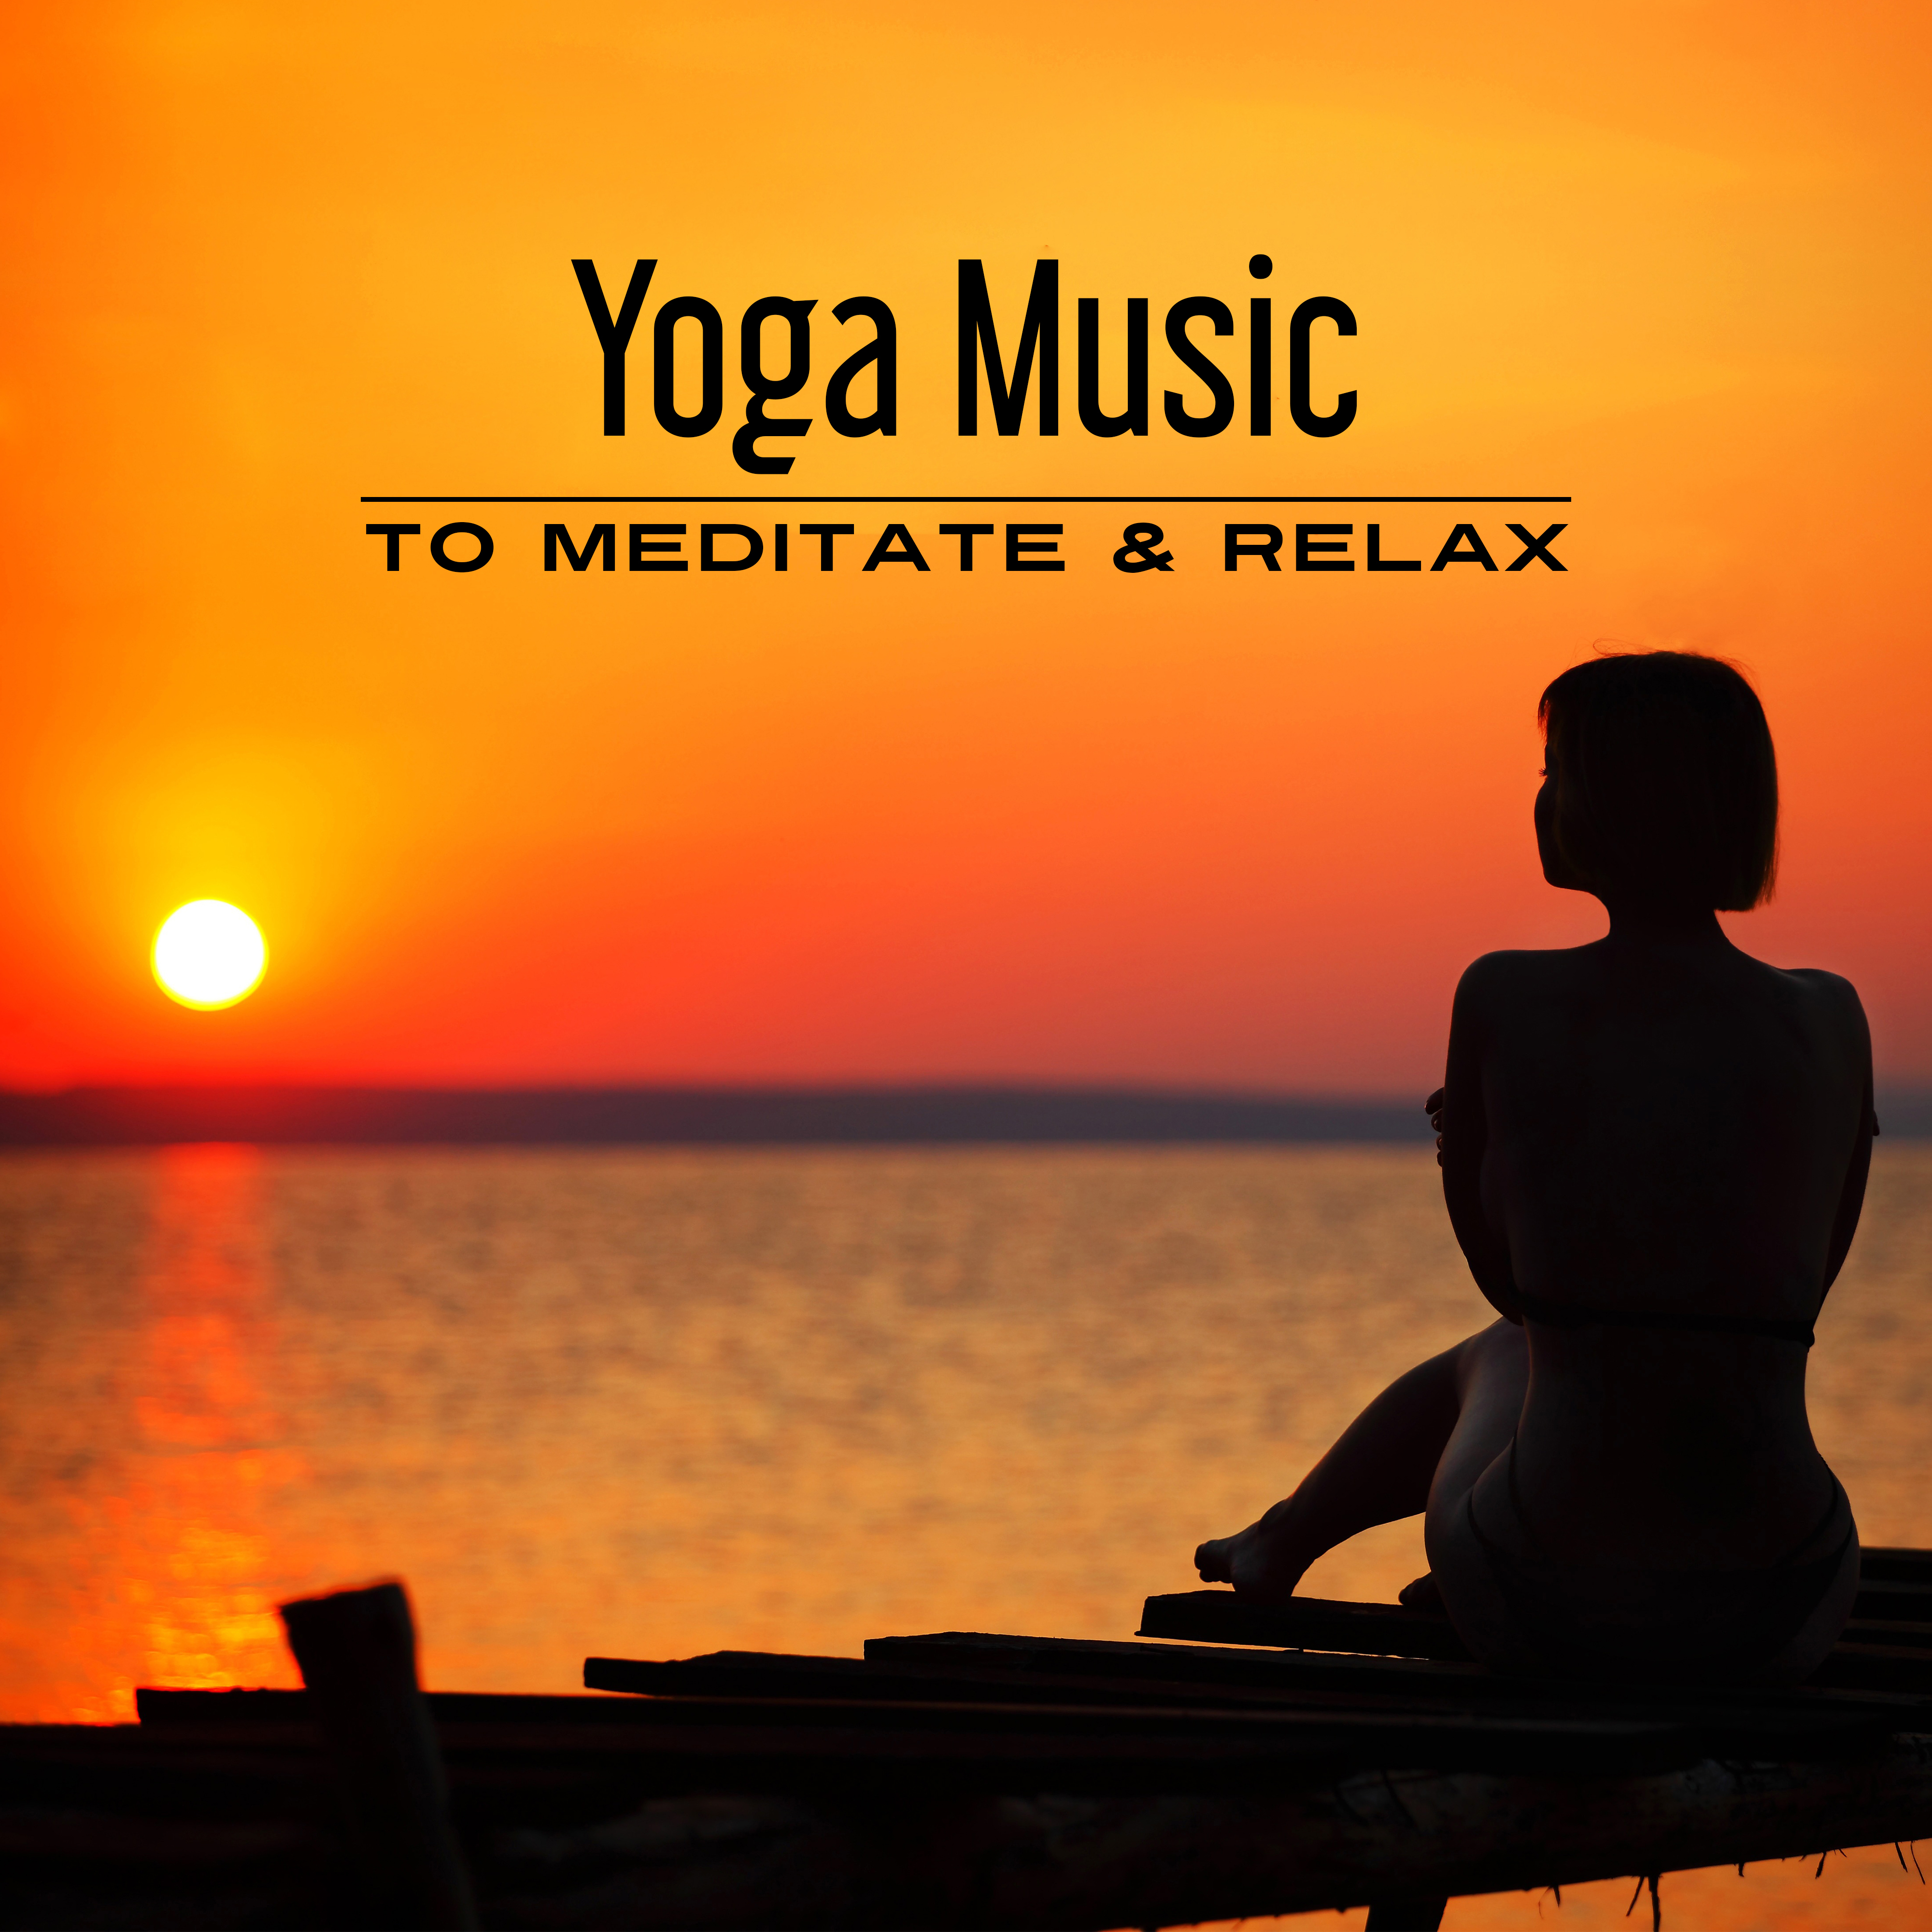 Yoga Music to Meditate & Relax – Relaxing Sounds, Music to Calm Down, Stress Relief, Harmony Soul